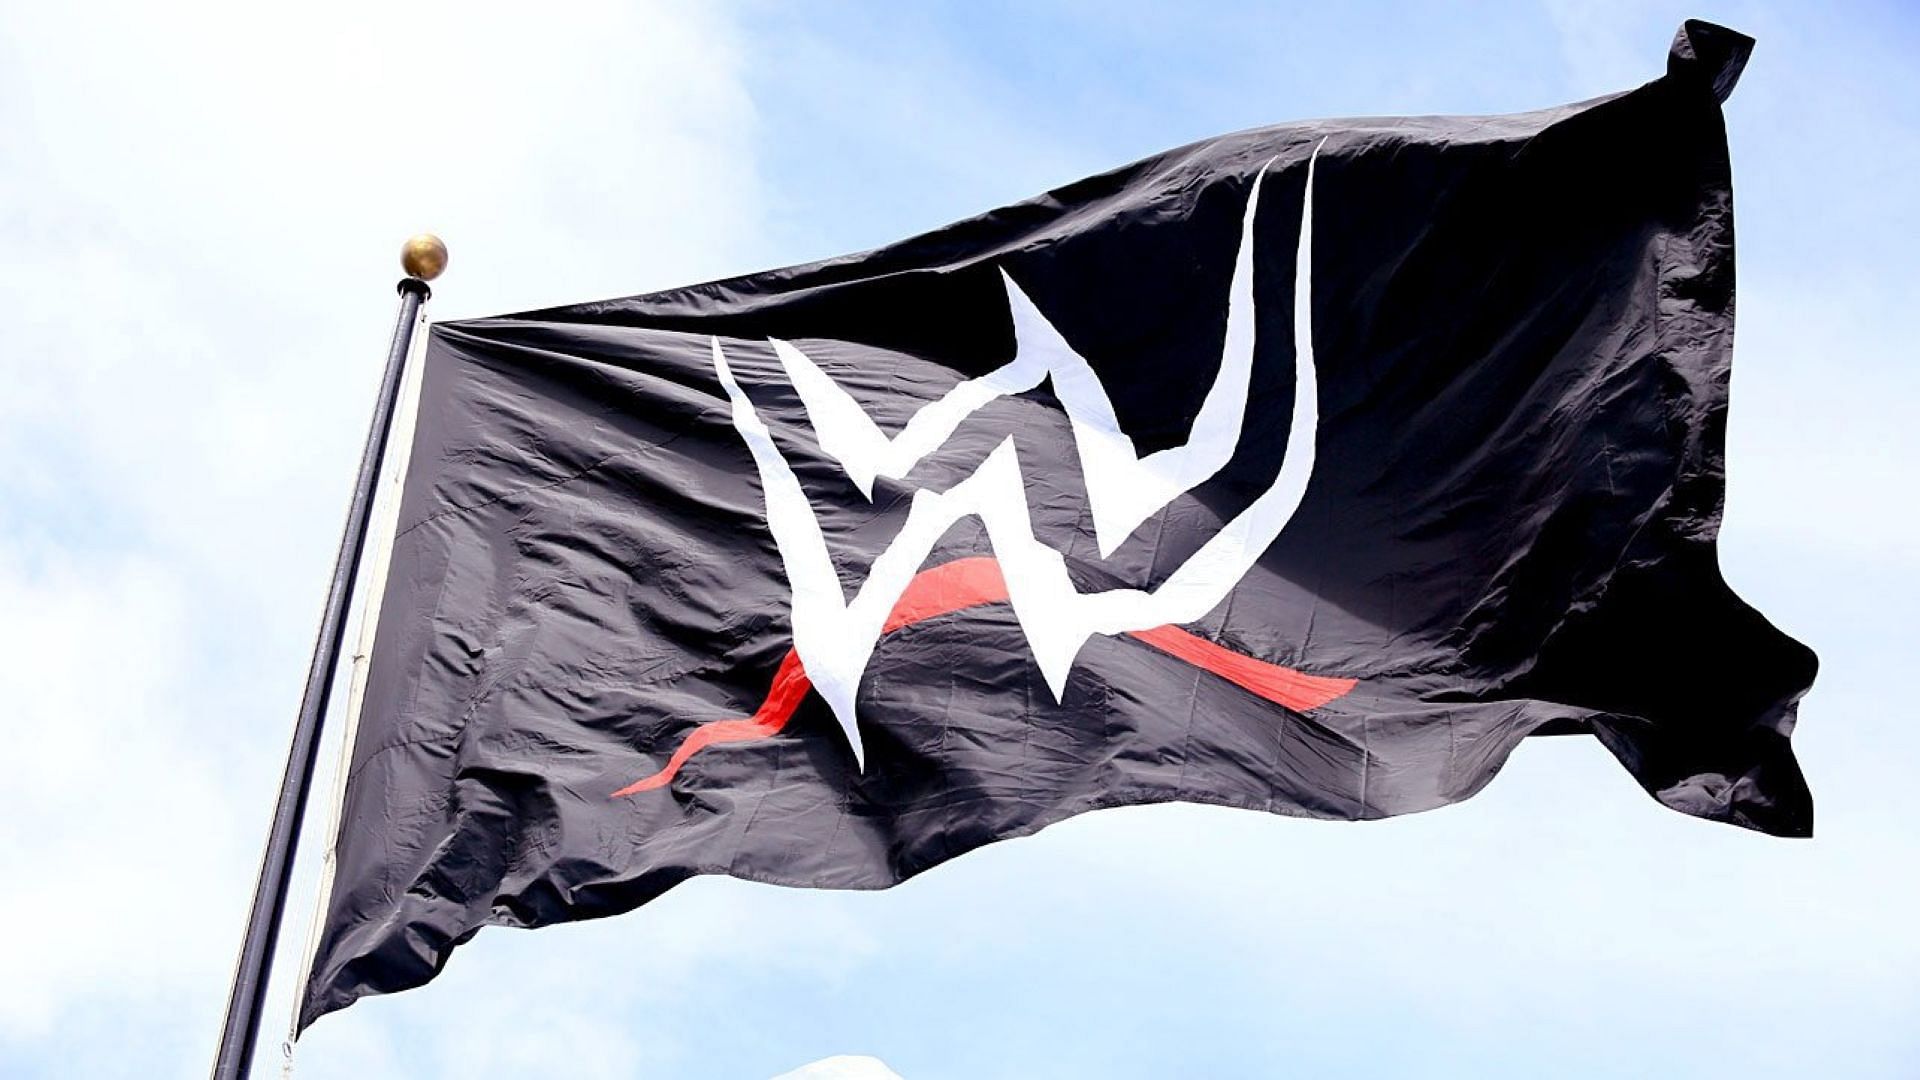 The WWE logo flag flies high above company HQ in Stamford